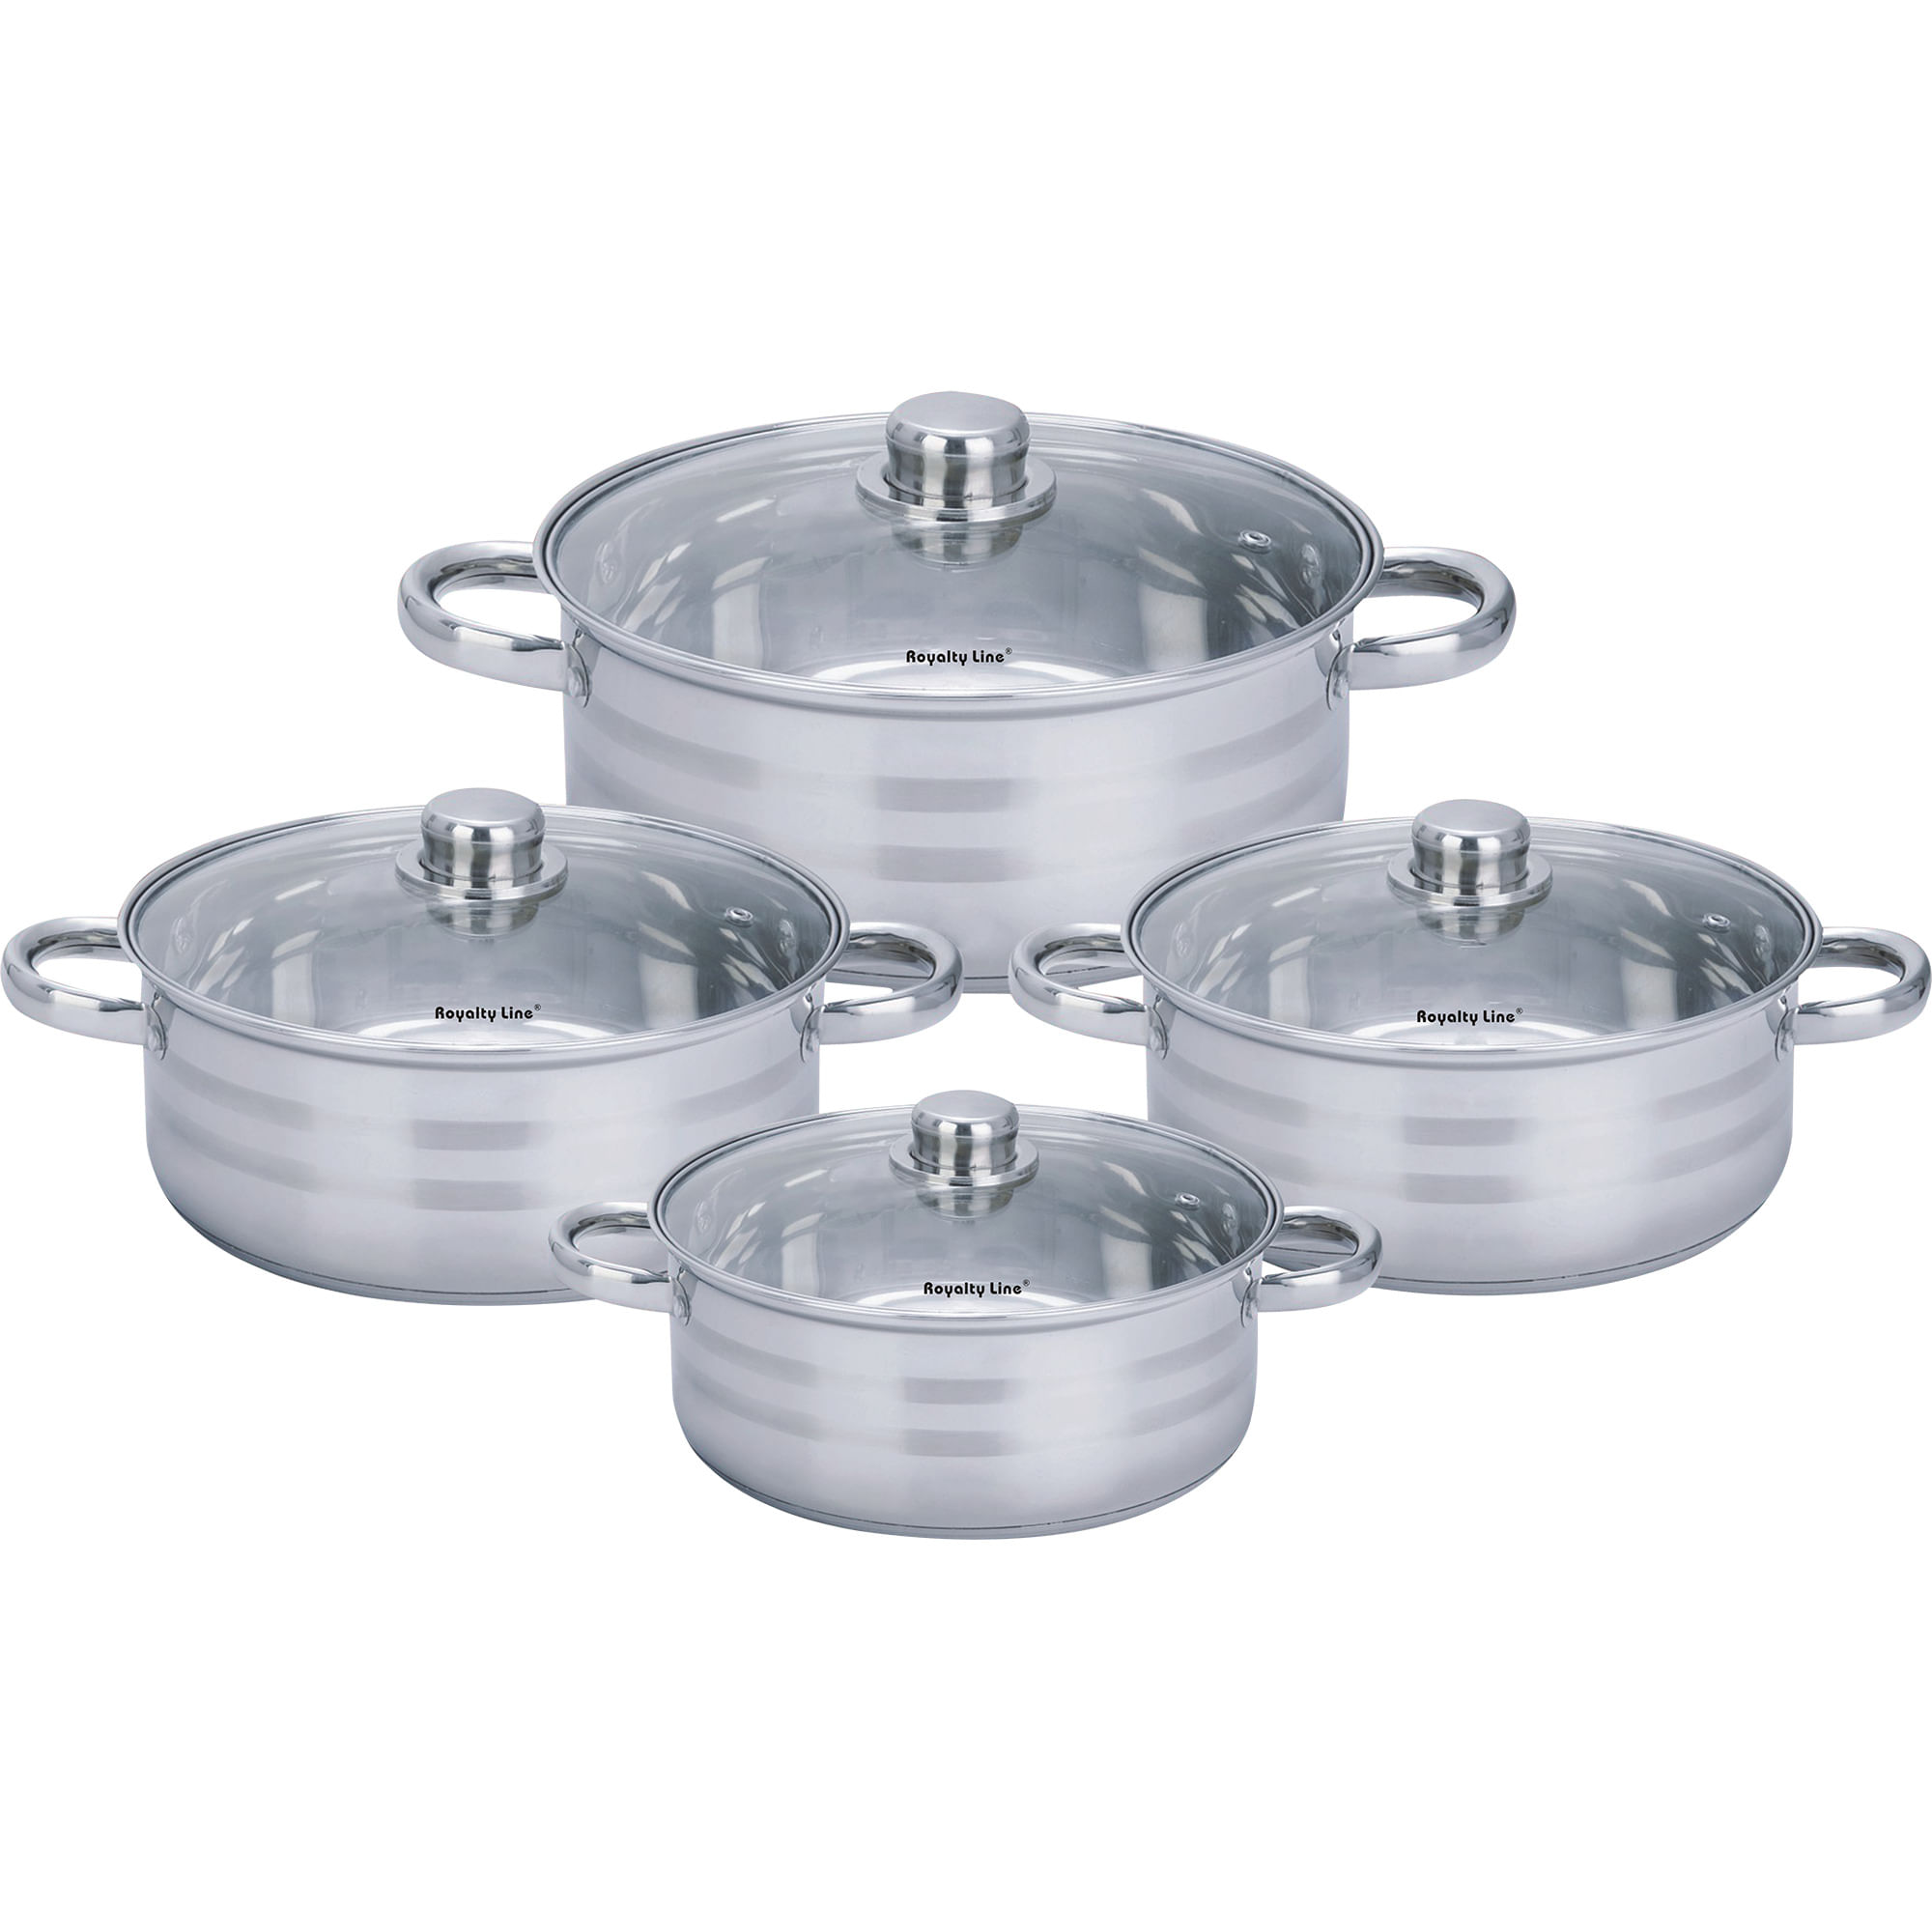 Set Oale Royalty line, inductie, 8 piese